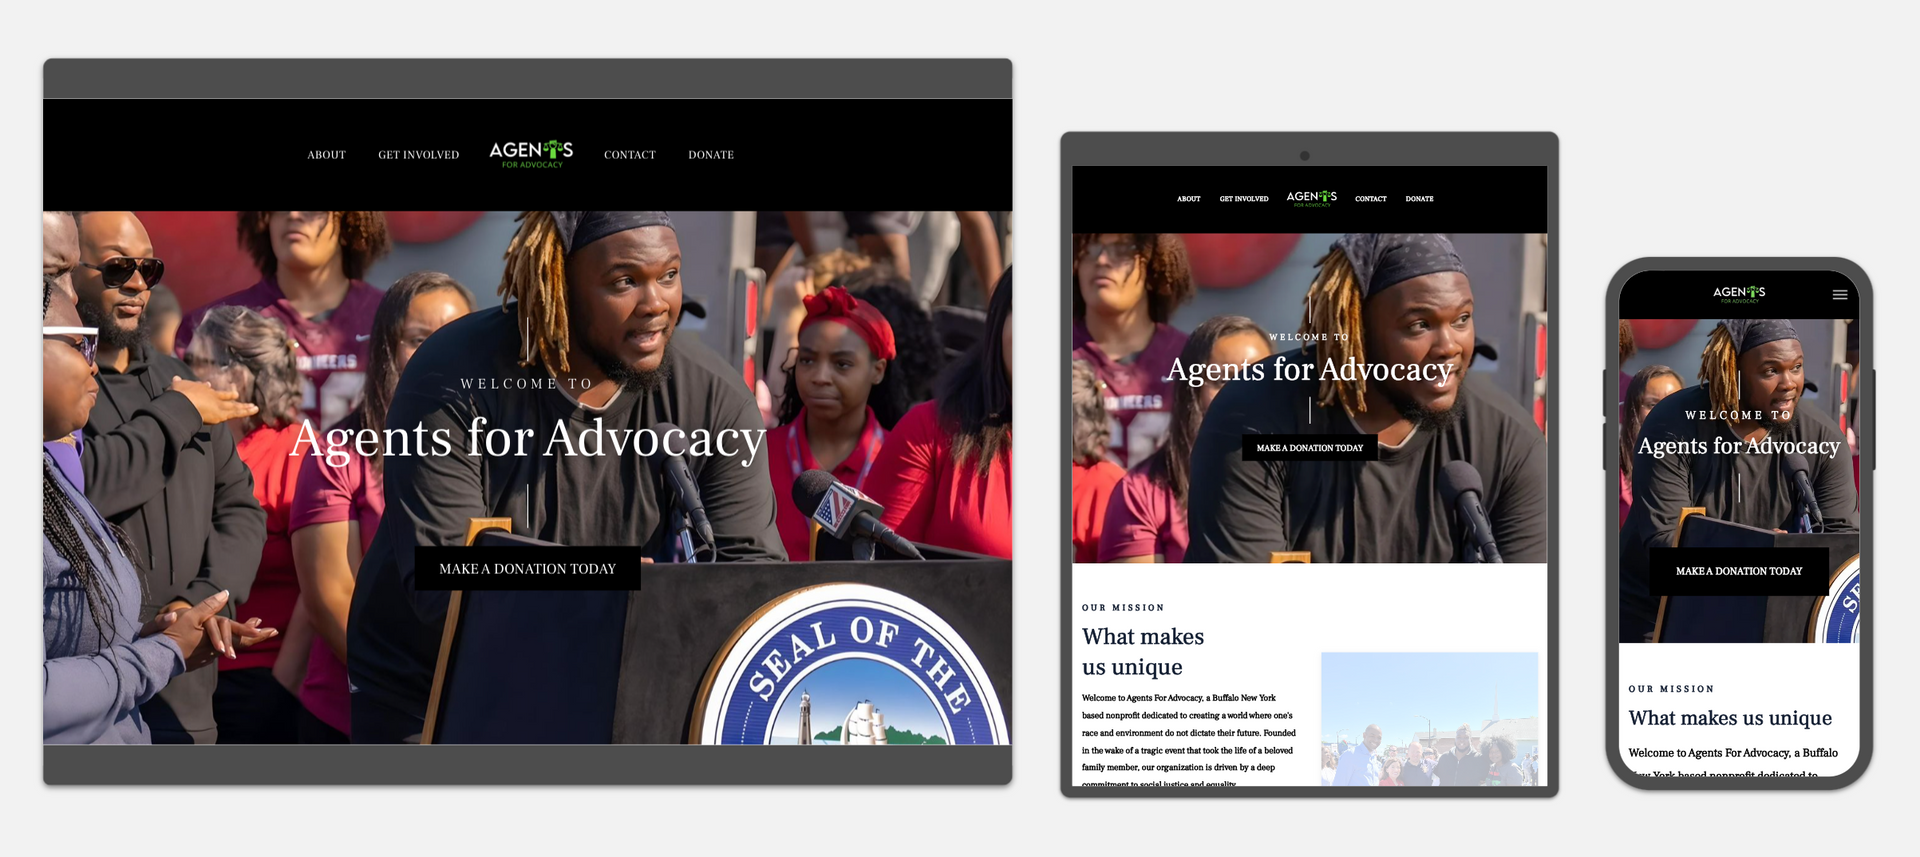 Website Design Example Agents for Advocacy